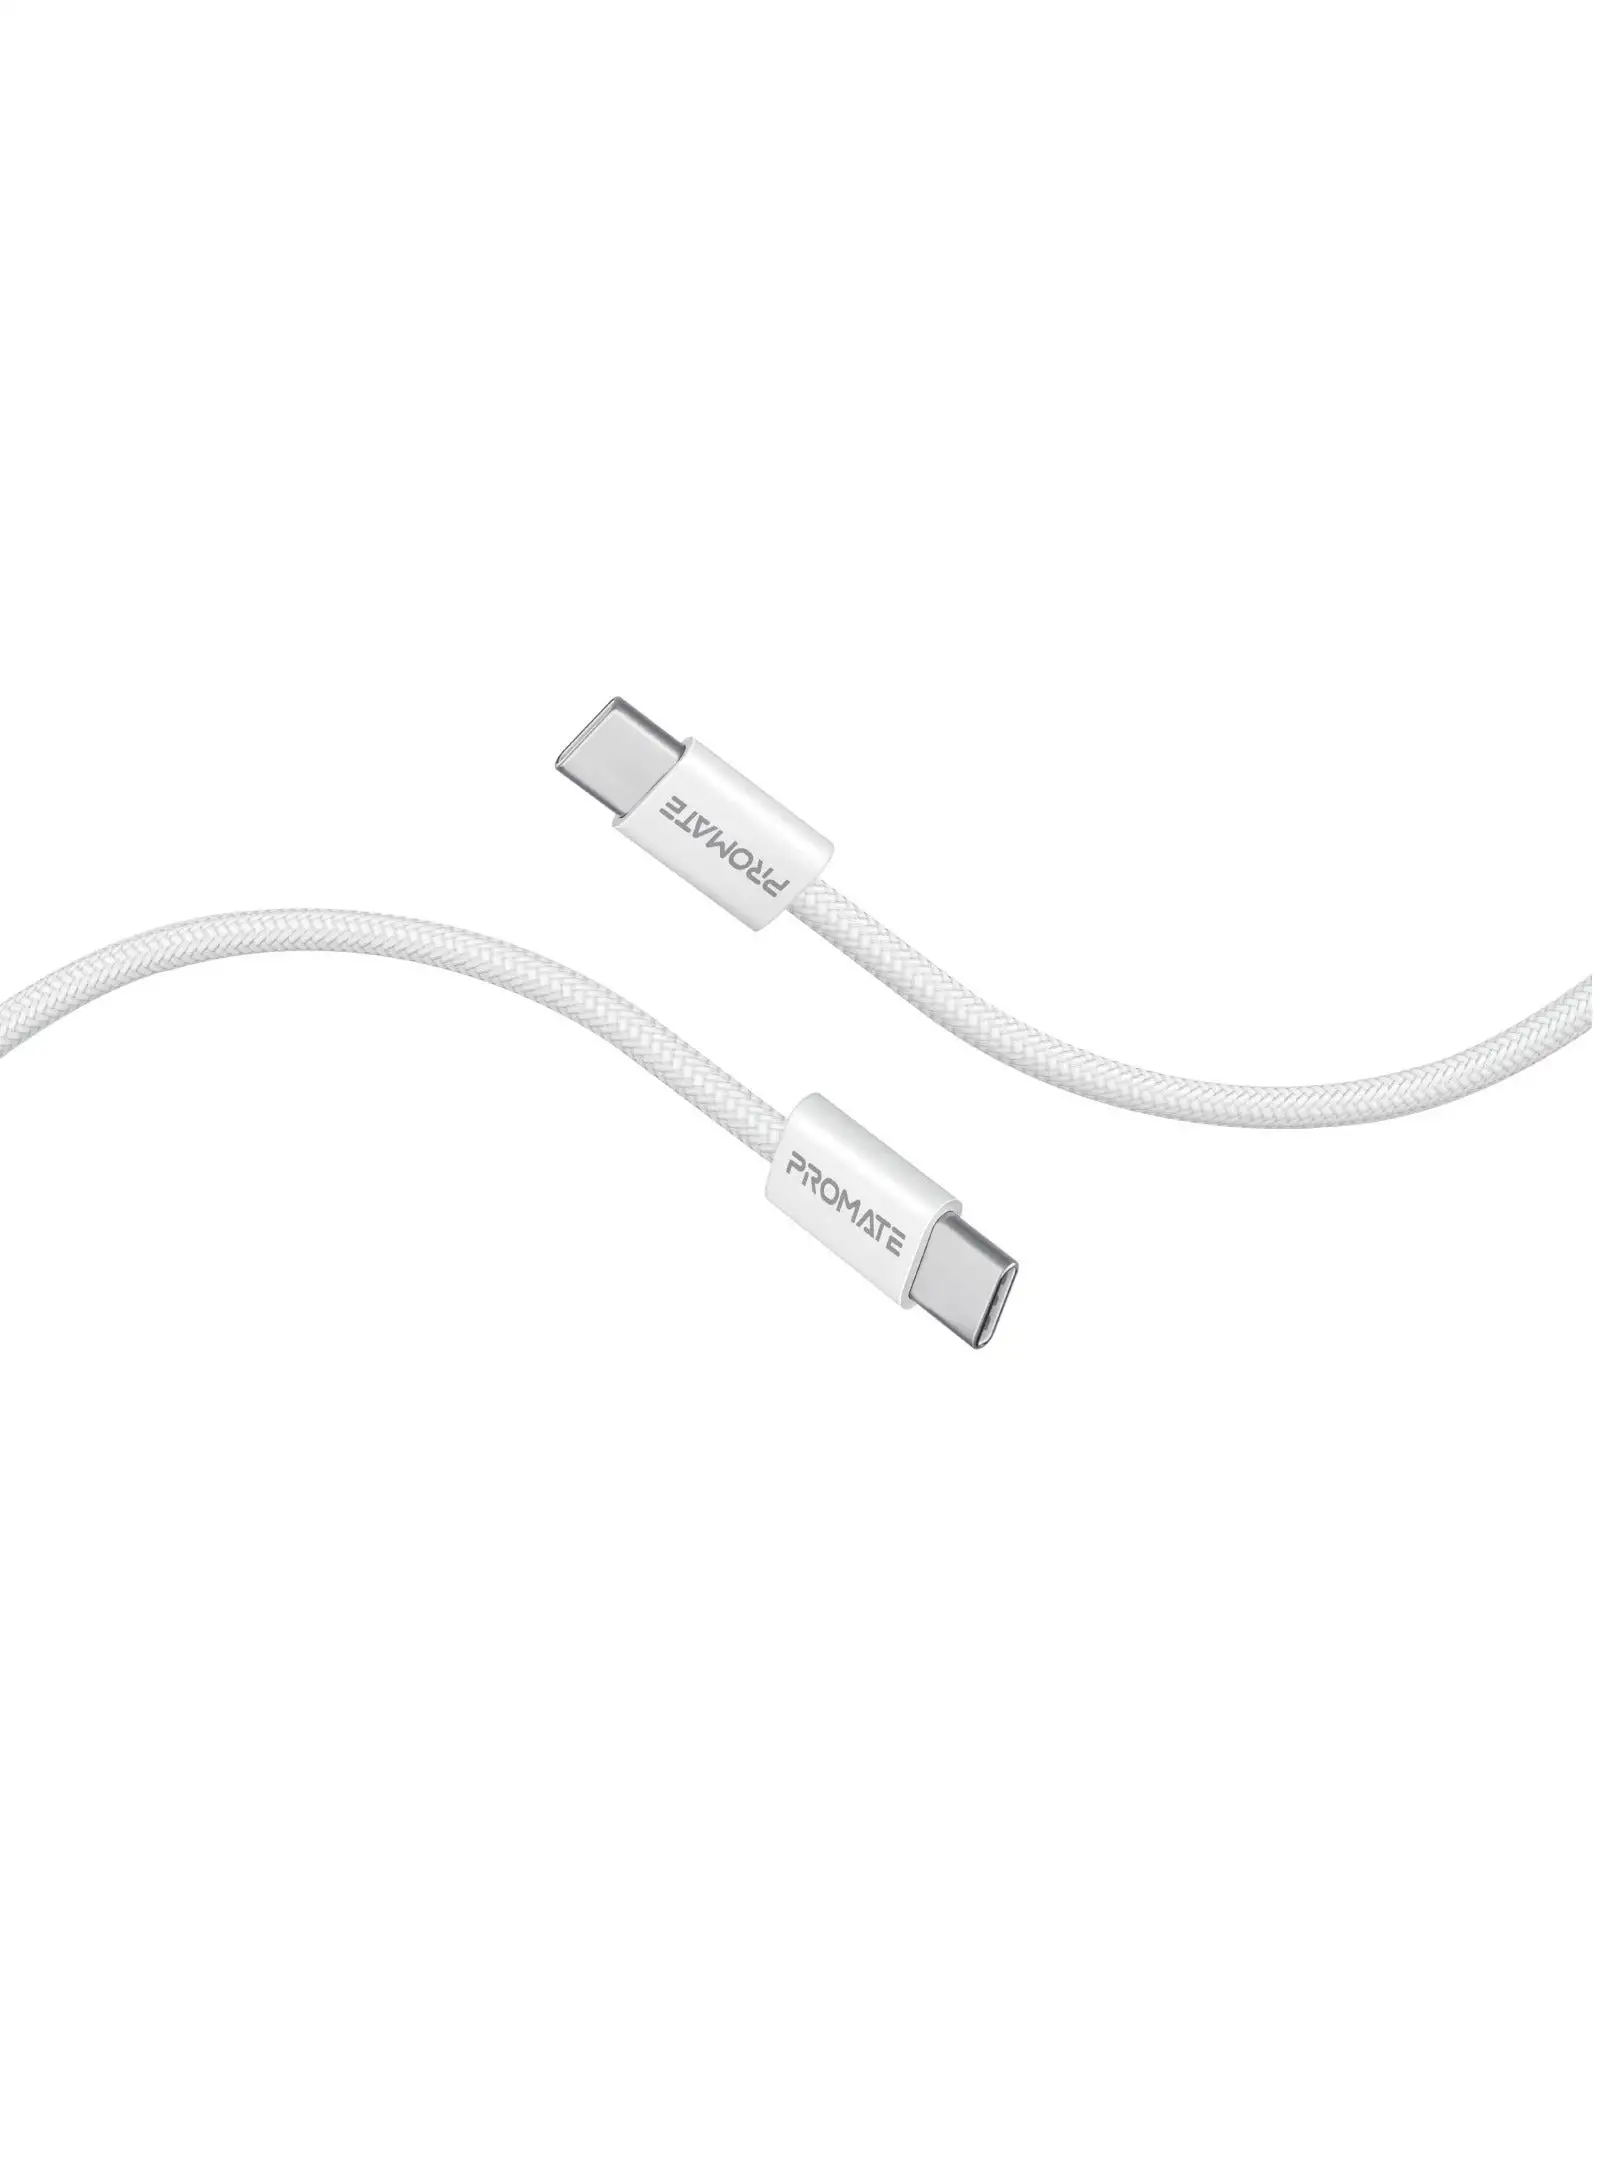 PROMATE USB-C Charging Cable, Powerful Sync Charge Type-C Cable with 60W Fast Power Delivery, 480Mbps Data Transfer and 120cm Tangle-Free Nylon Braided Cord, EcoLine-CC120 White